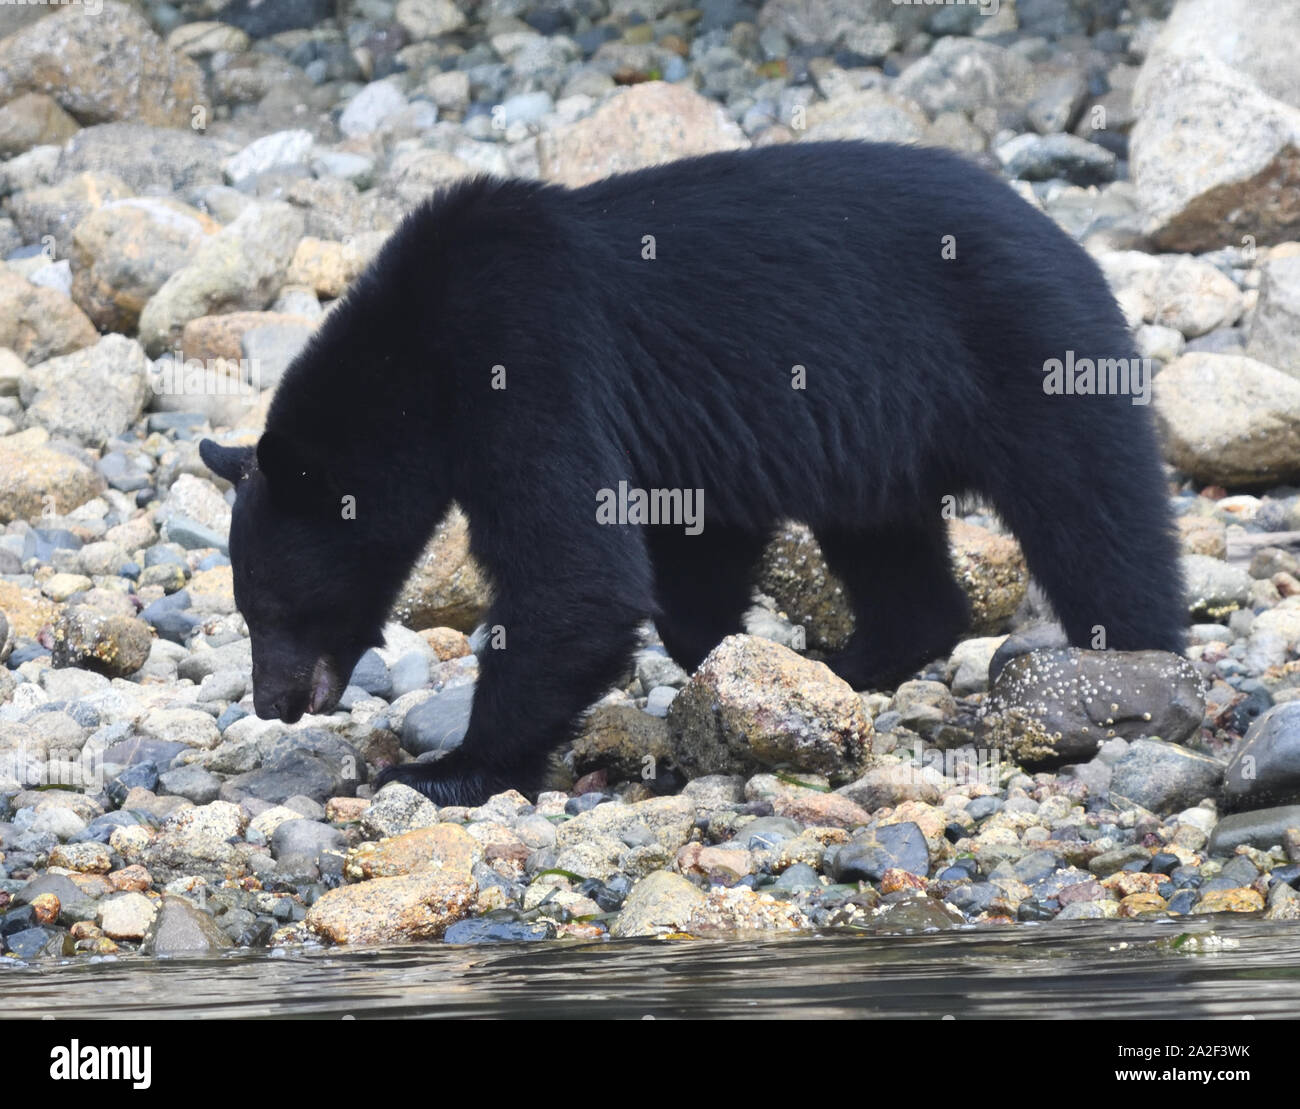 A black bear (Ursus americanus) searched for food by turning over boulders on the beach with its strong paws.  Tofino, British Columbia, Canada Stock Photo